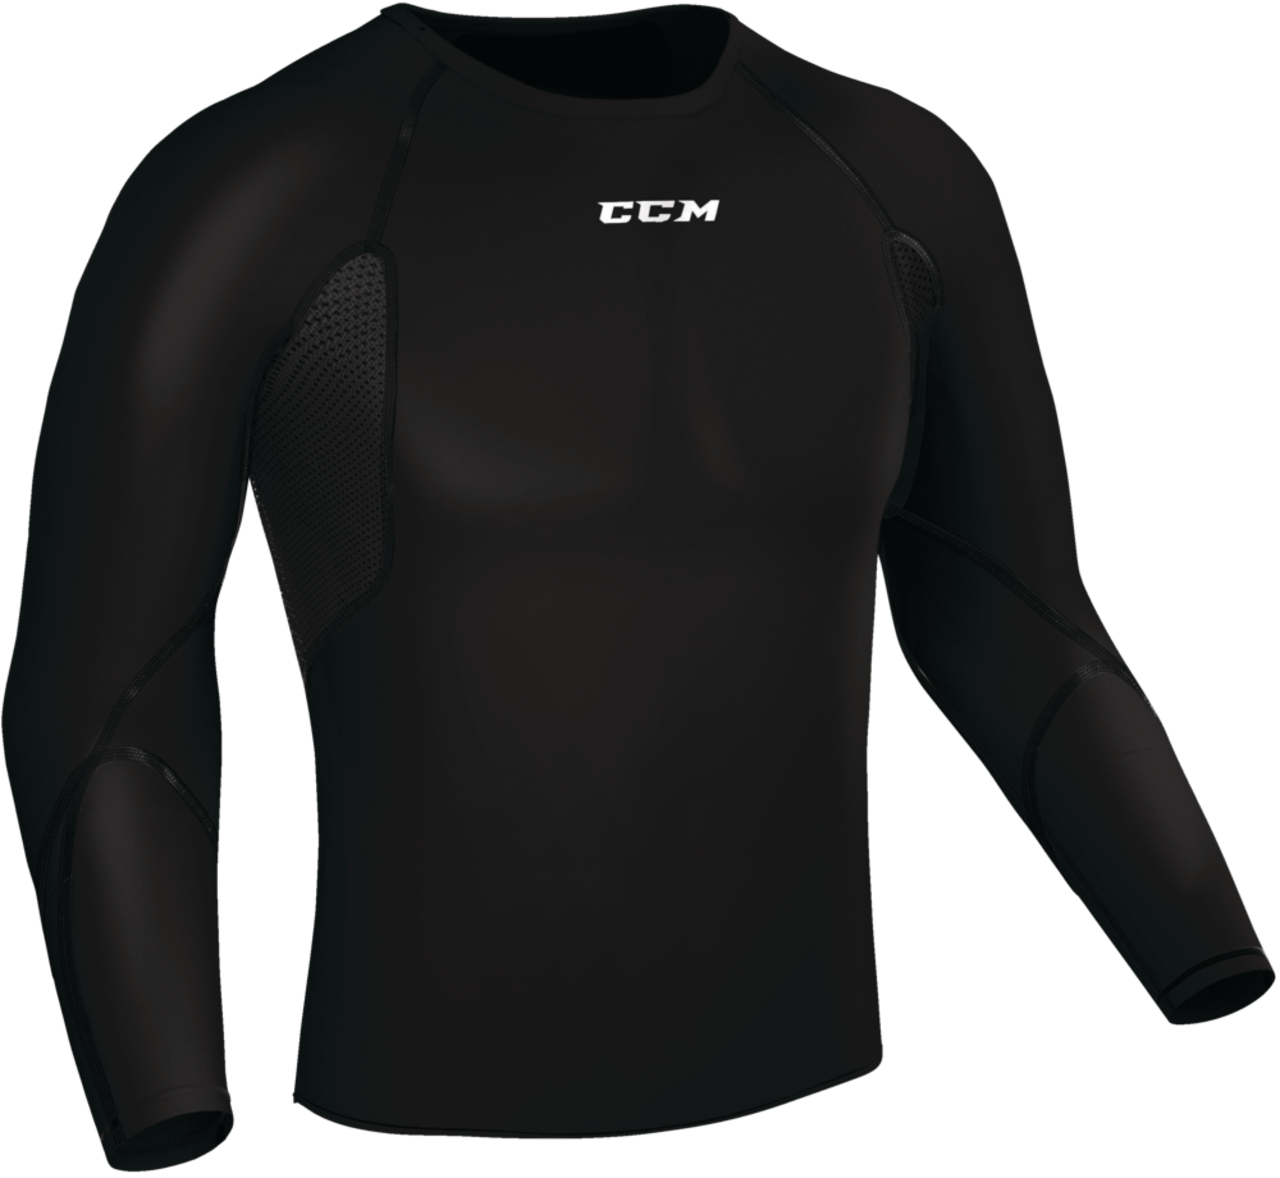 https://media-www.canadiantire.ca/product/playing/hockey/hockey-accessories/0838531/ccm-compression-long-sleeve-top-junior-large-07008fb4-9b54-441f-90b1-3e62592d6c48.png?imdensity=1&imwidth=1244&impolicy=mZoom